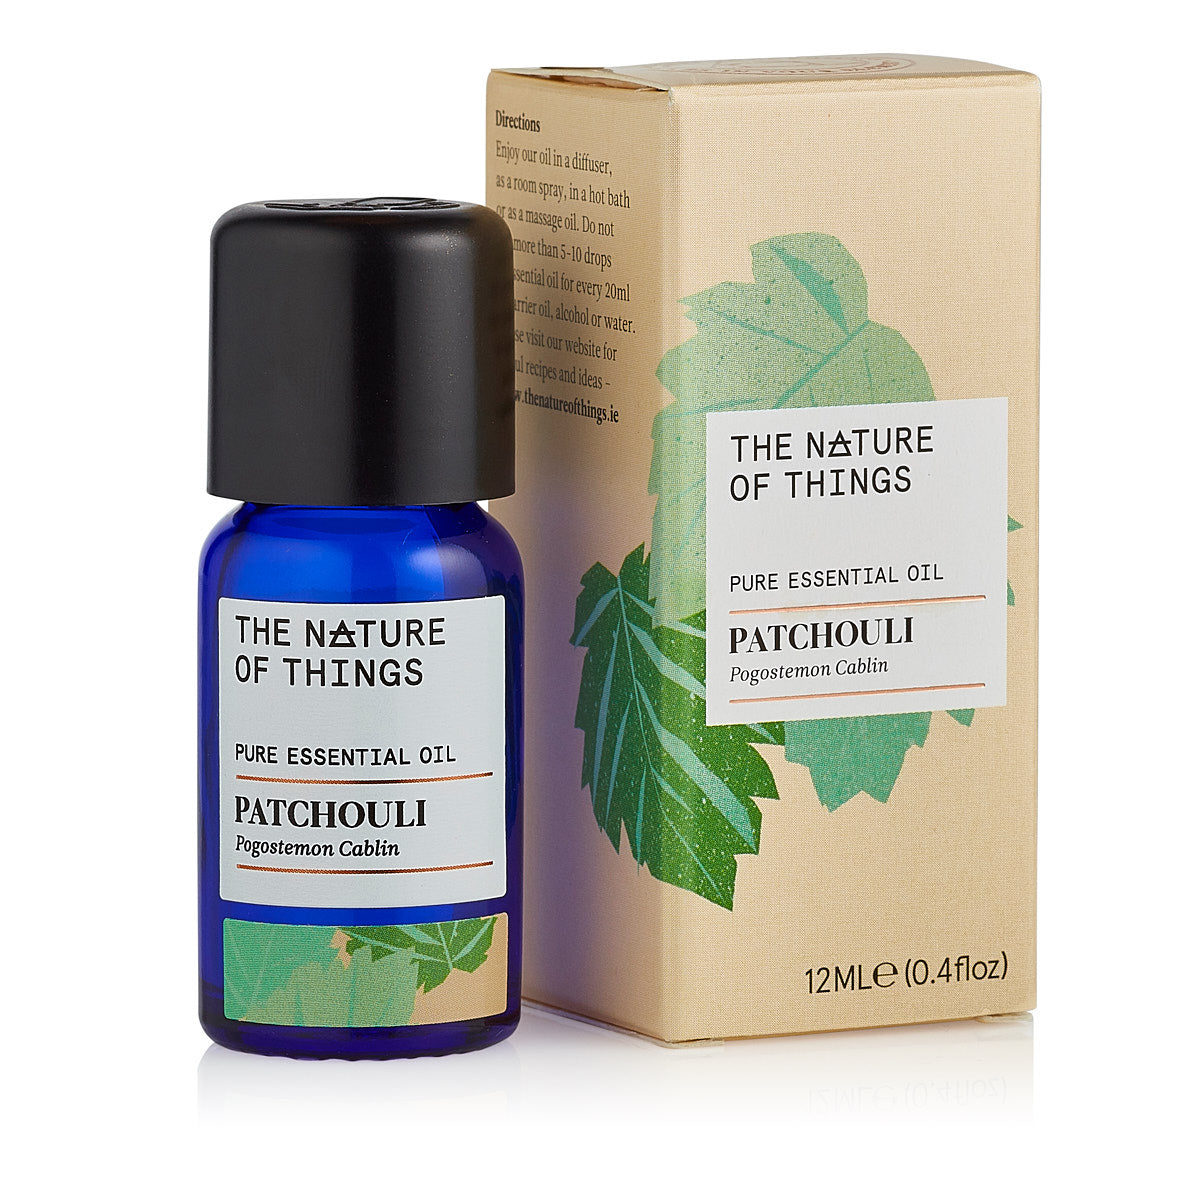 Patchouli Essential Oil from The Nature of Things